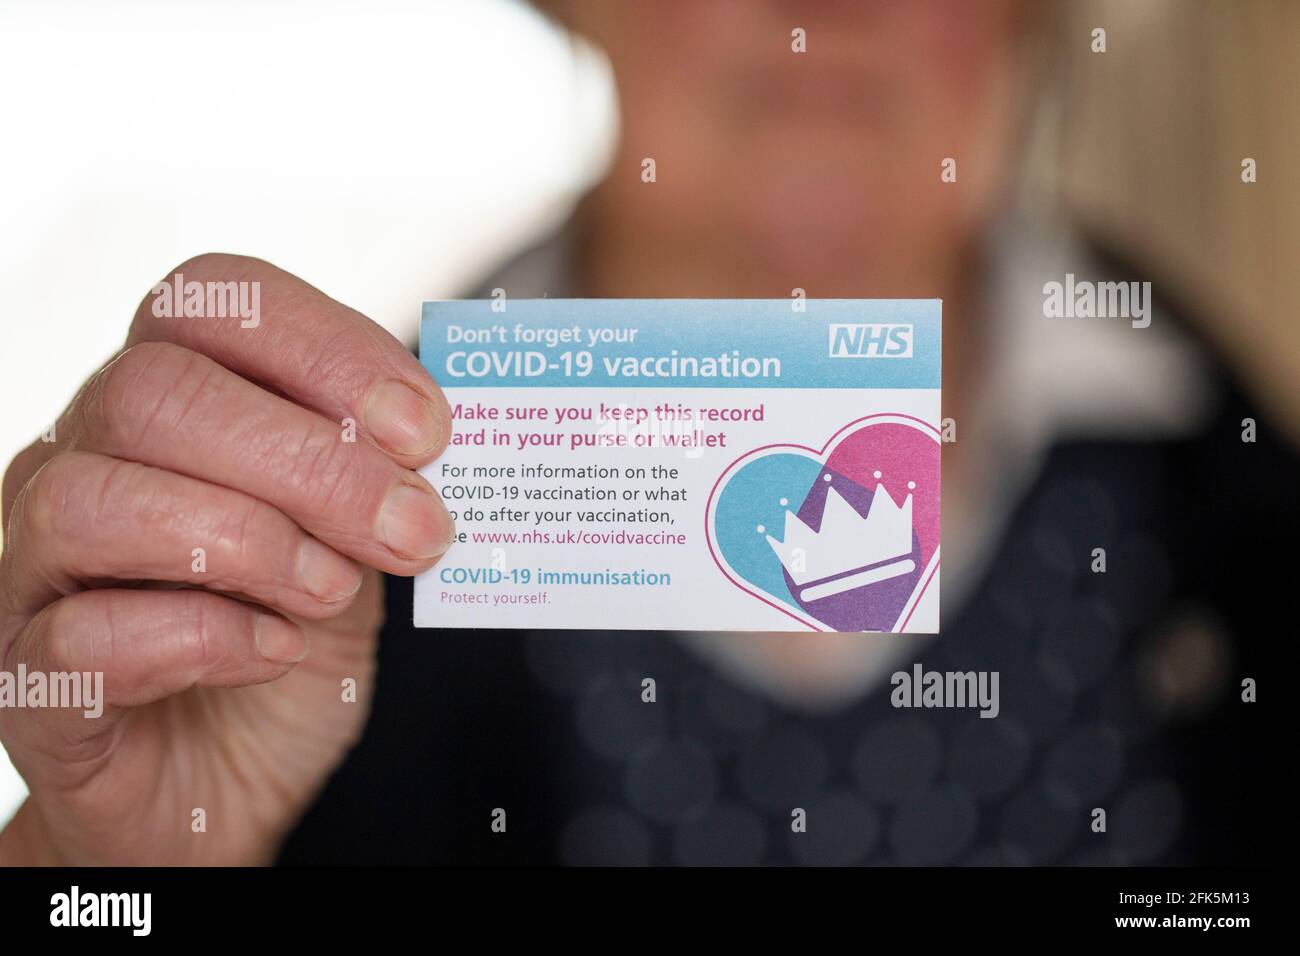 LONDON, UK - APRIL 2021. A person holding NHS Covid-19 vaccination record card Stock Photo